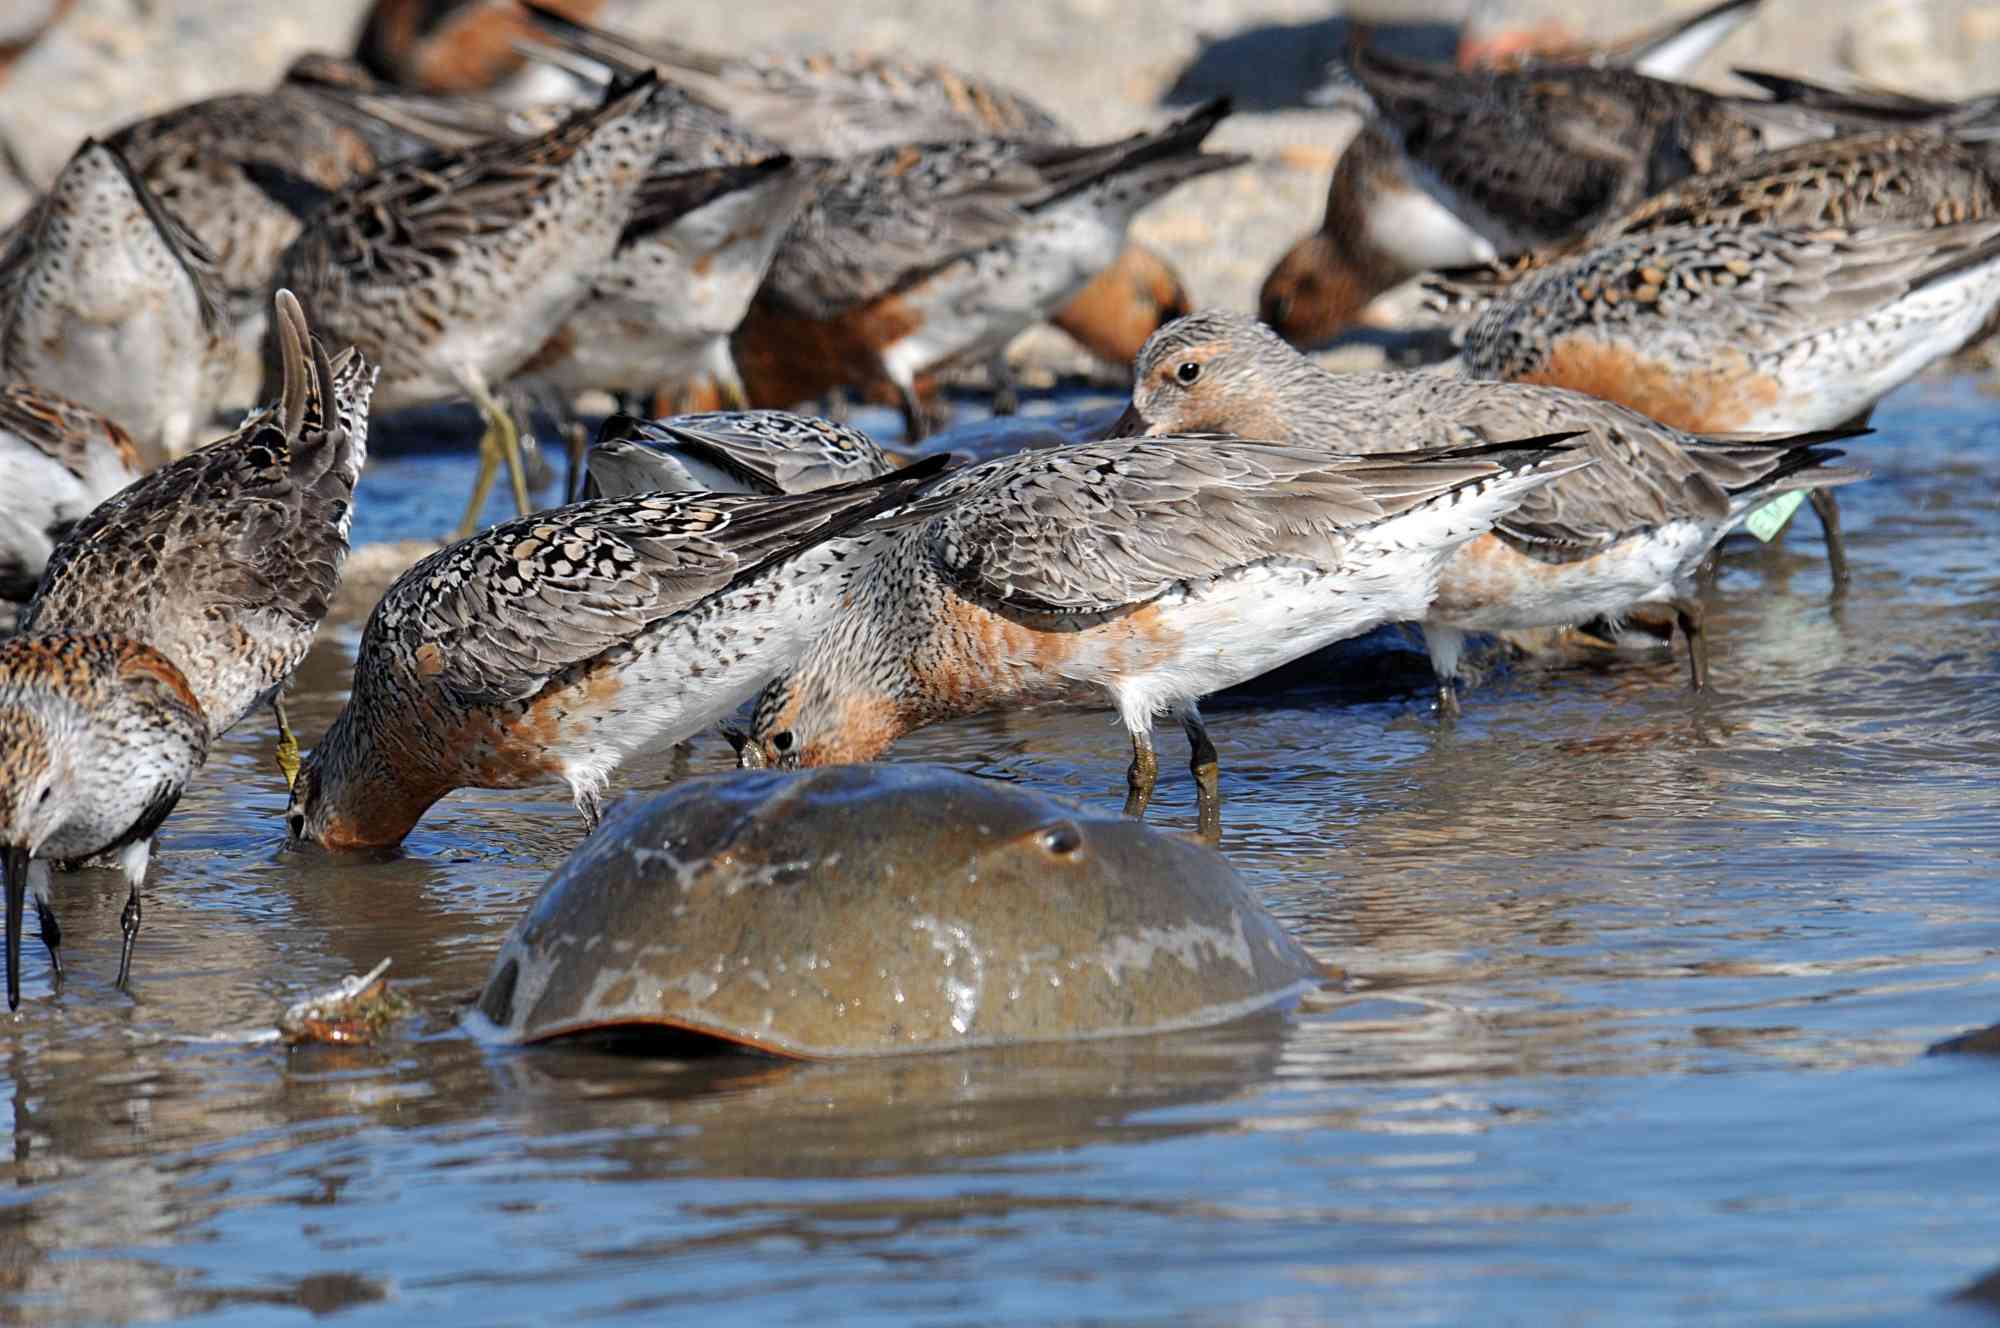 Red knots and horseshoe crab